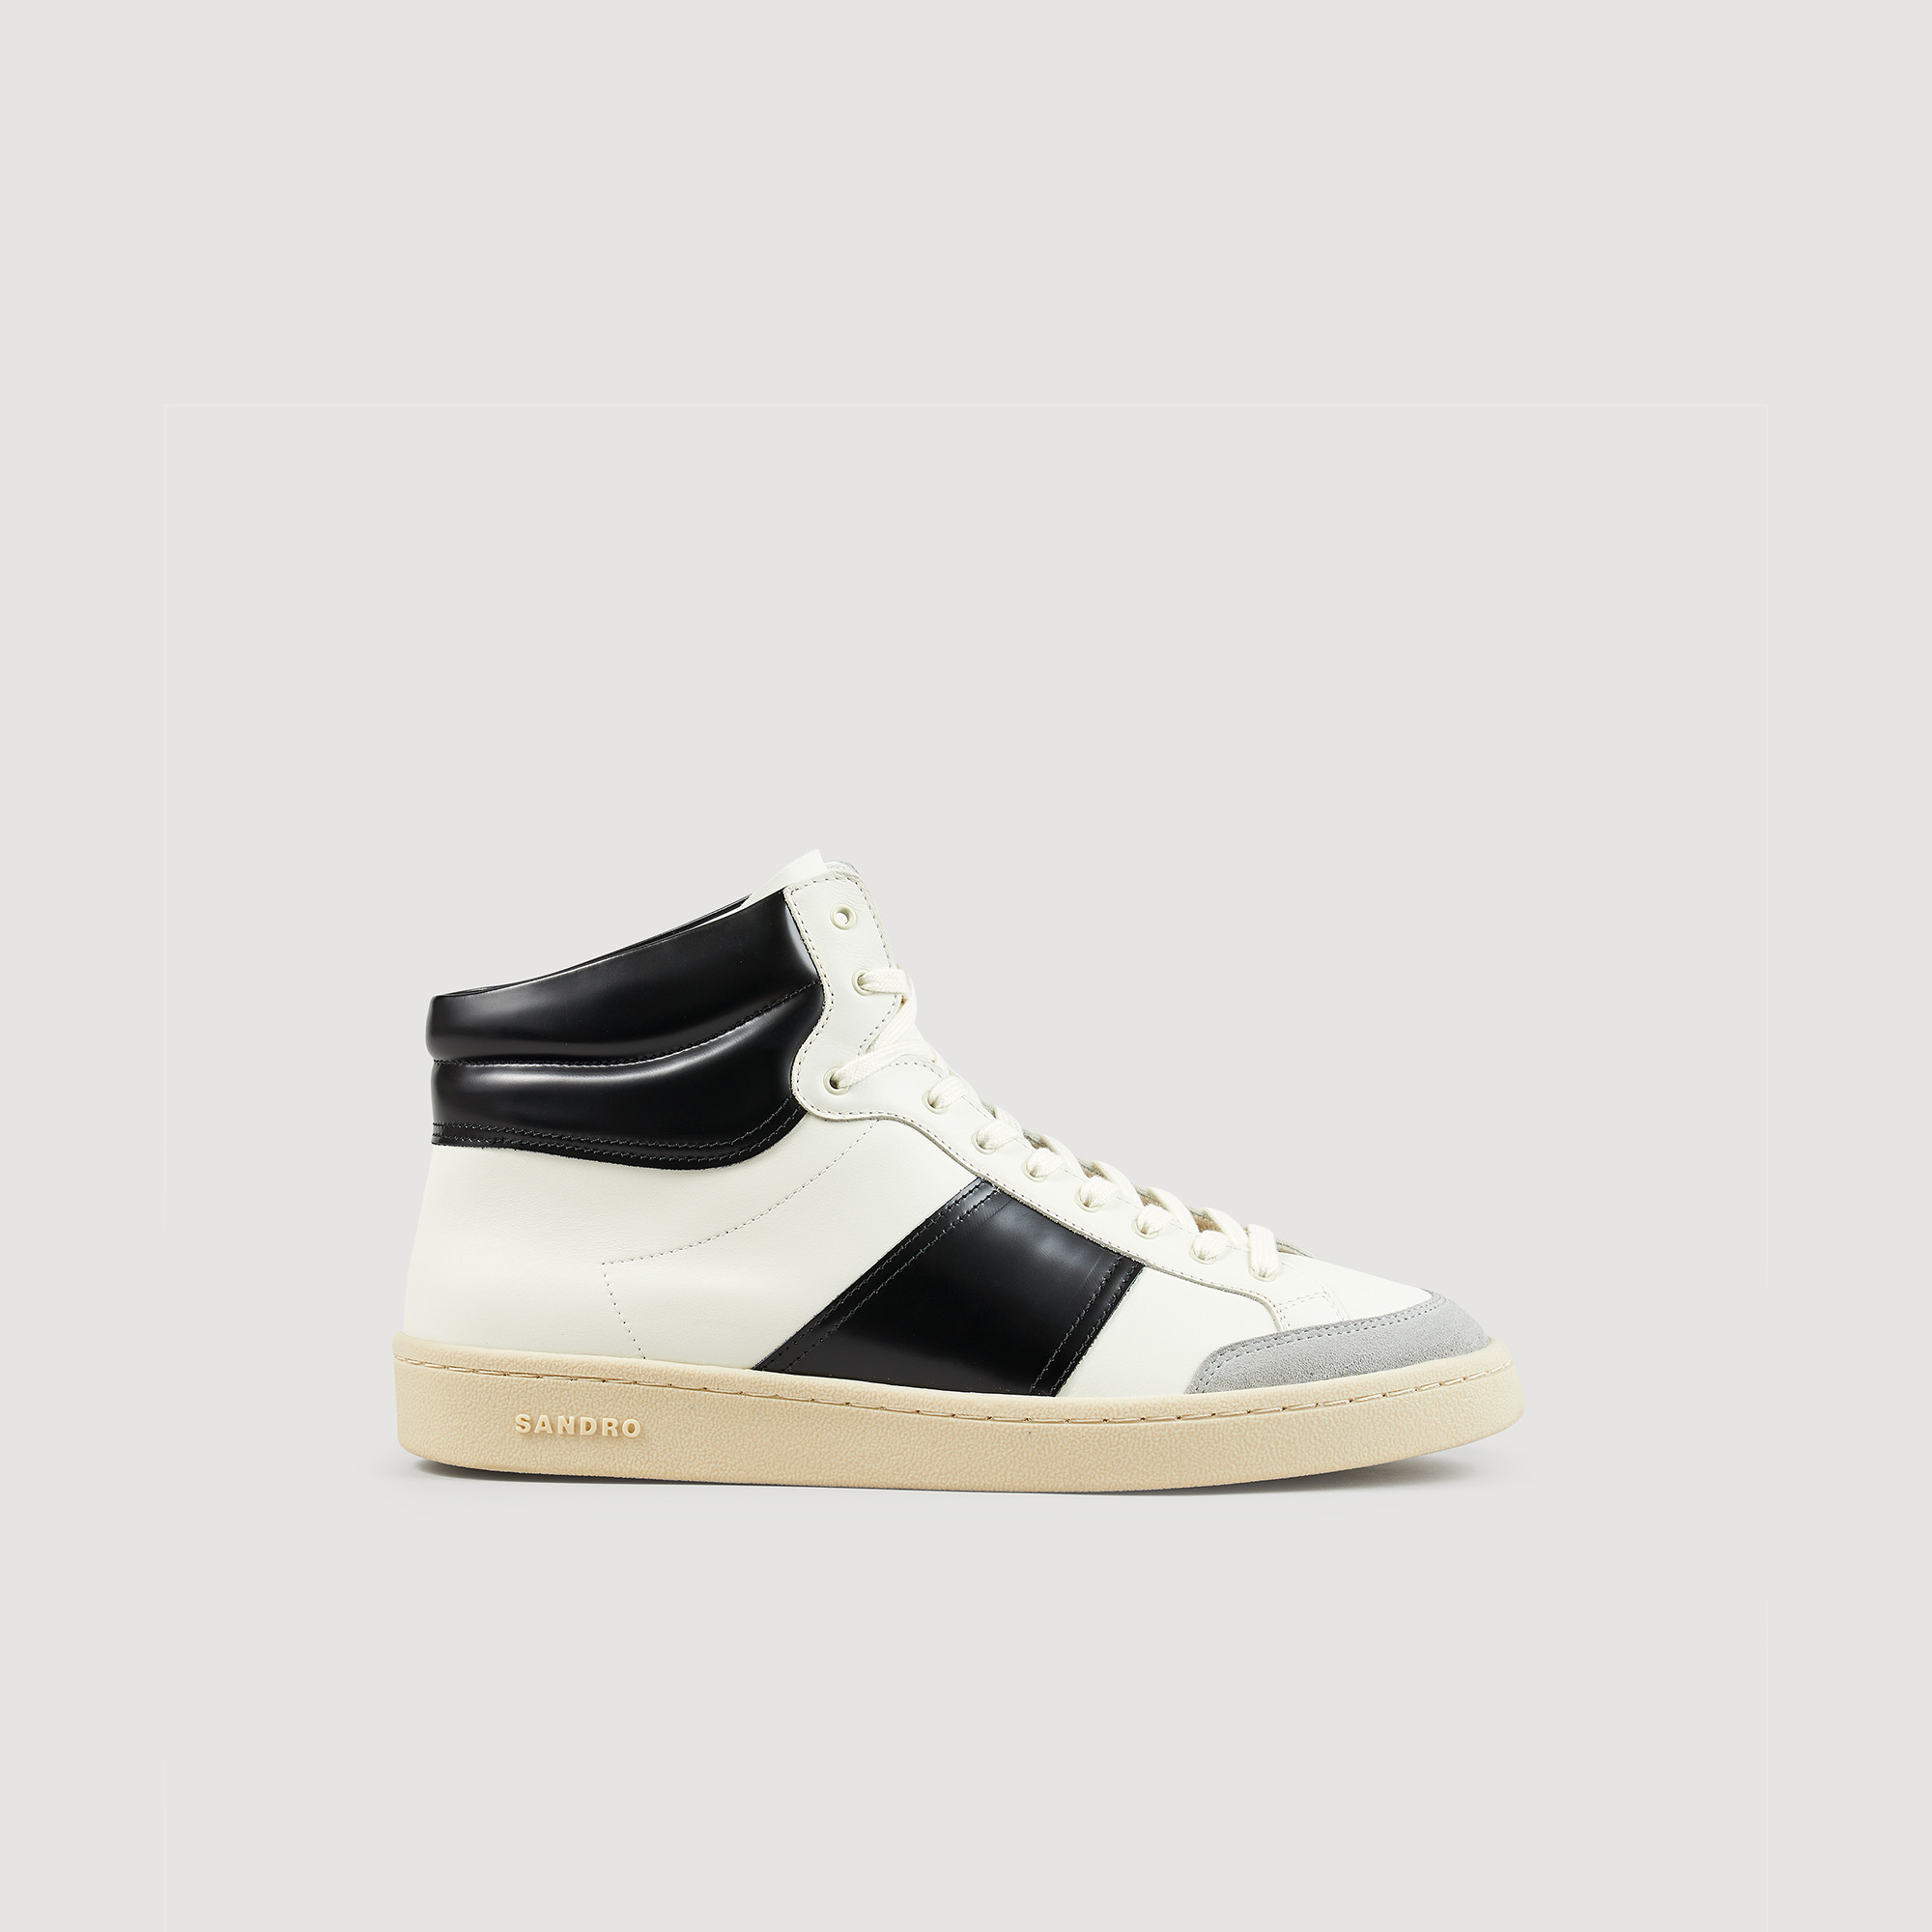 Sandro cotton Sock lining: cow Outer sole: Semi high-top leather sneakers embellished with contrasting inserts and a Sandro on tongue, with laces and a rubber sole